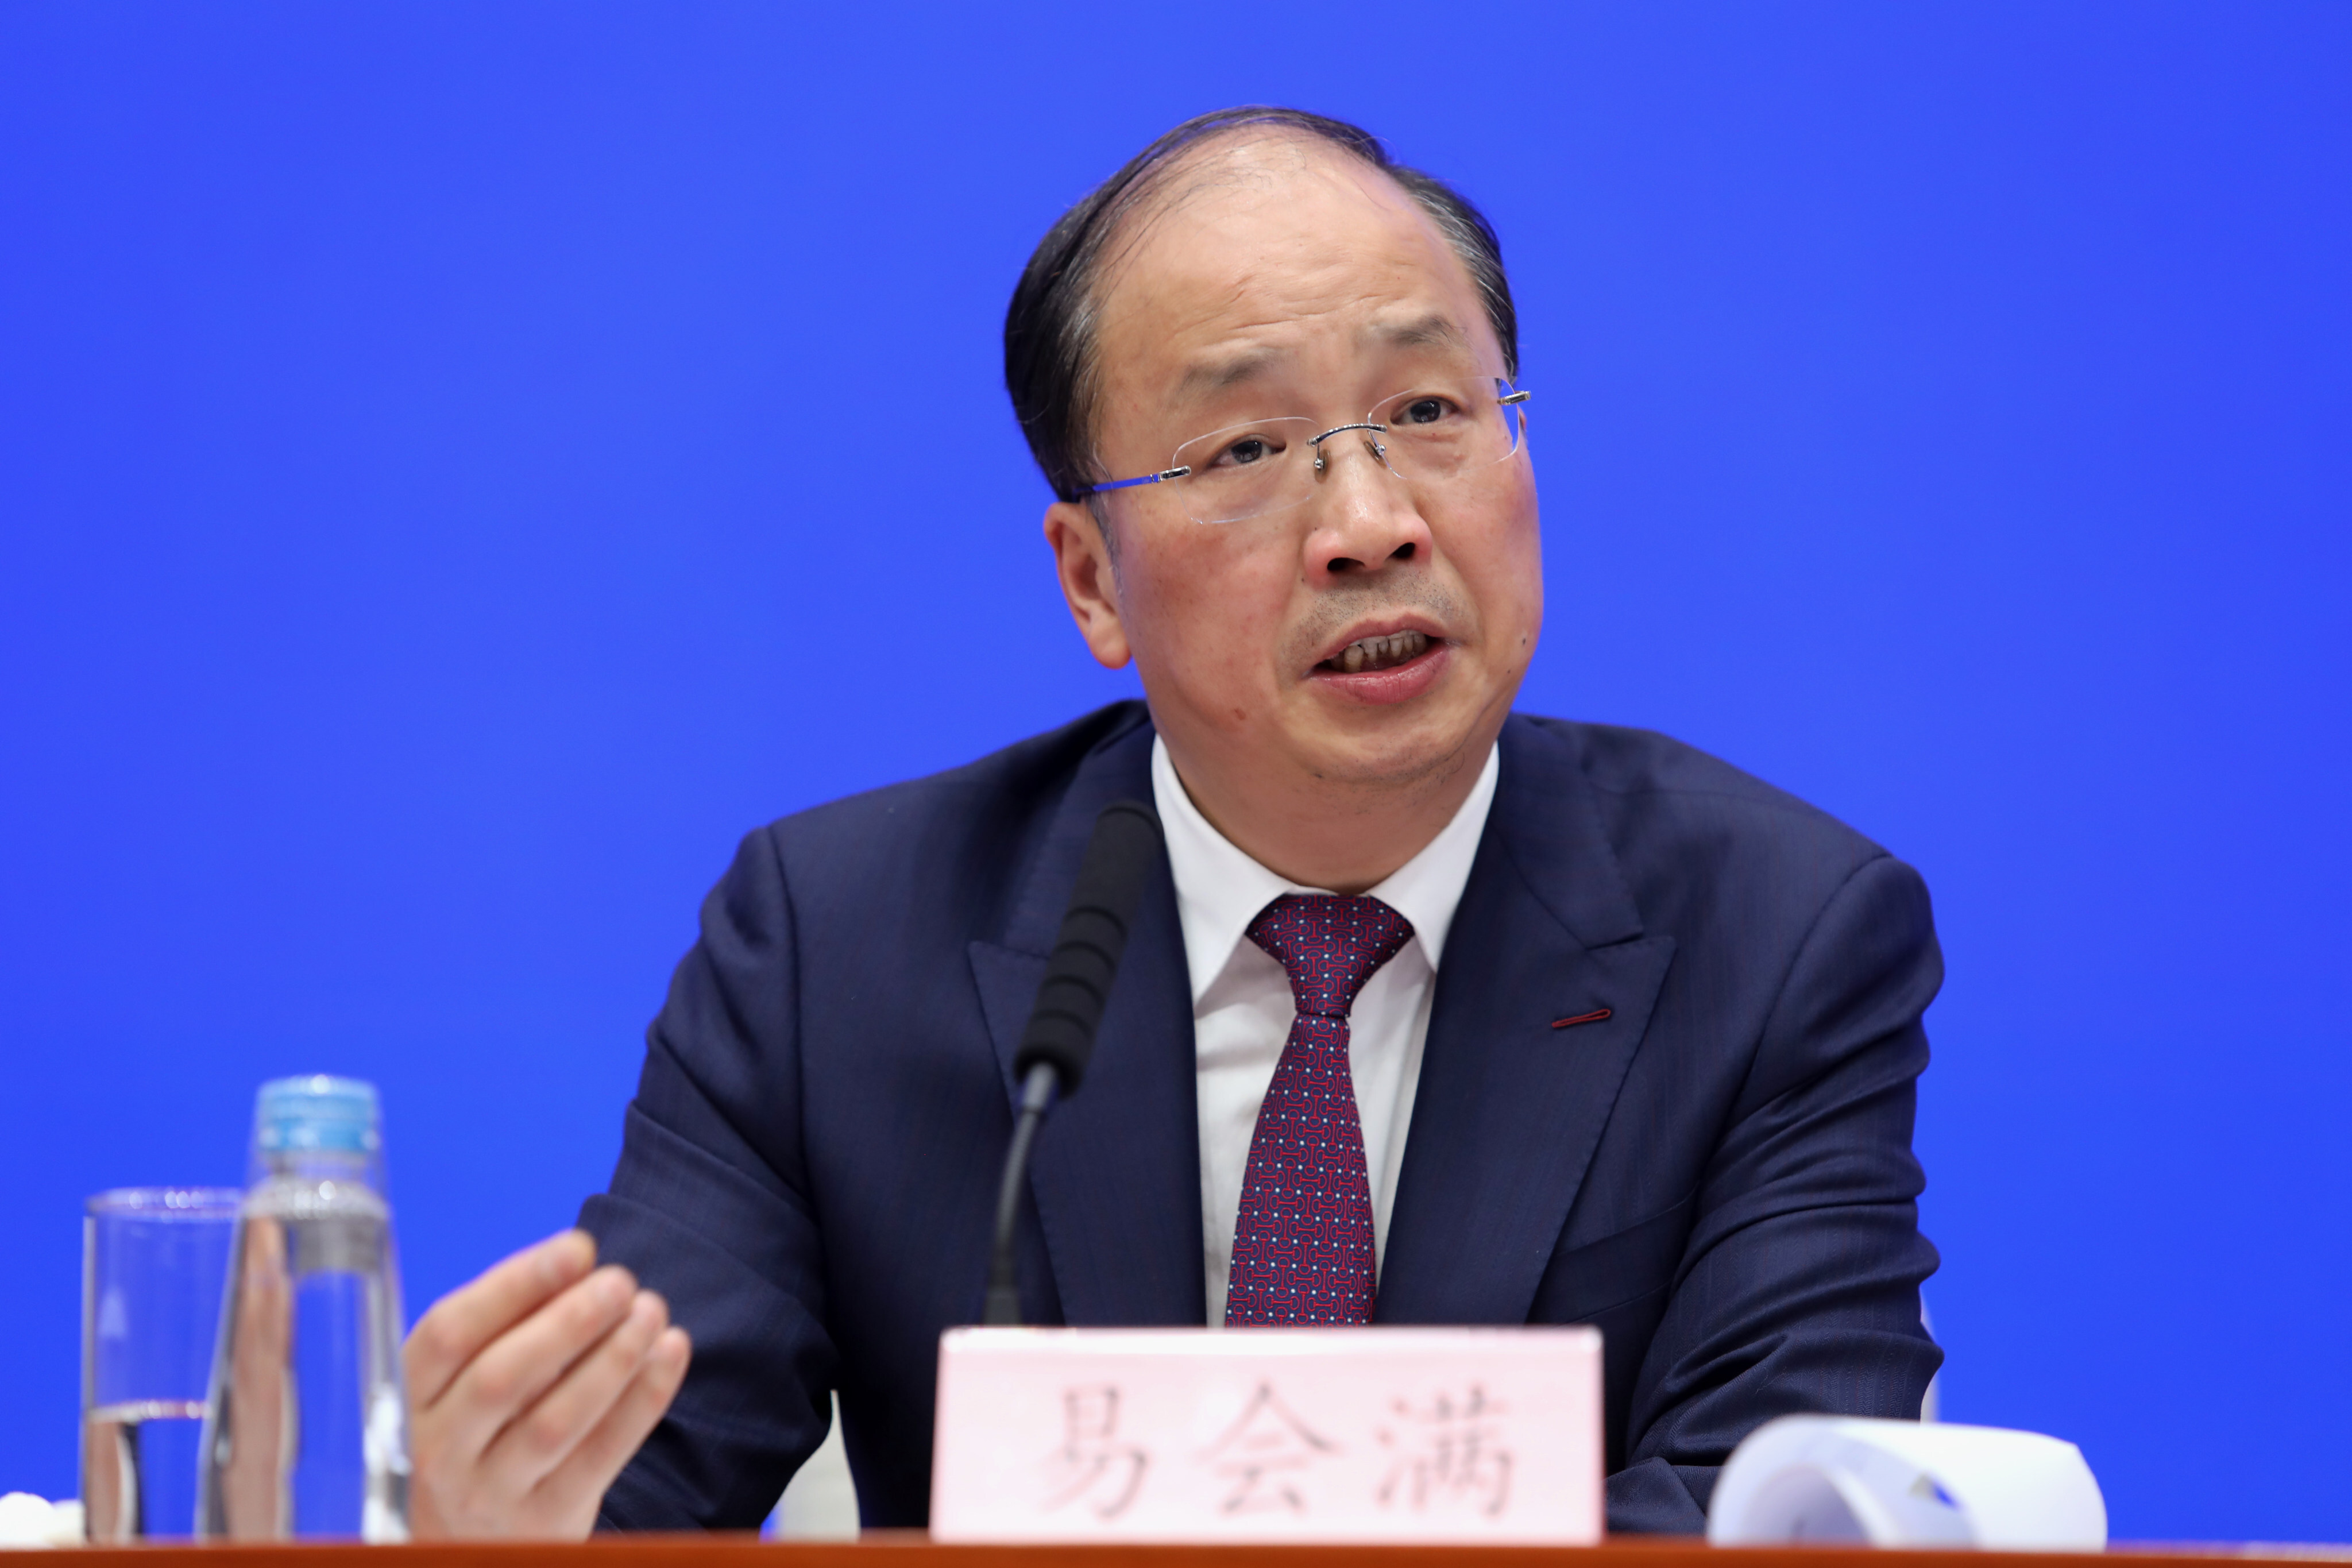 Yi Huiman, chairman of the China Securities Regulatory Commission (CSRC), during a press conference in Beijing on February 27, 2019 Photo: Simon Song